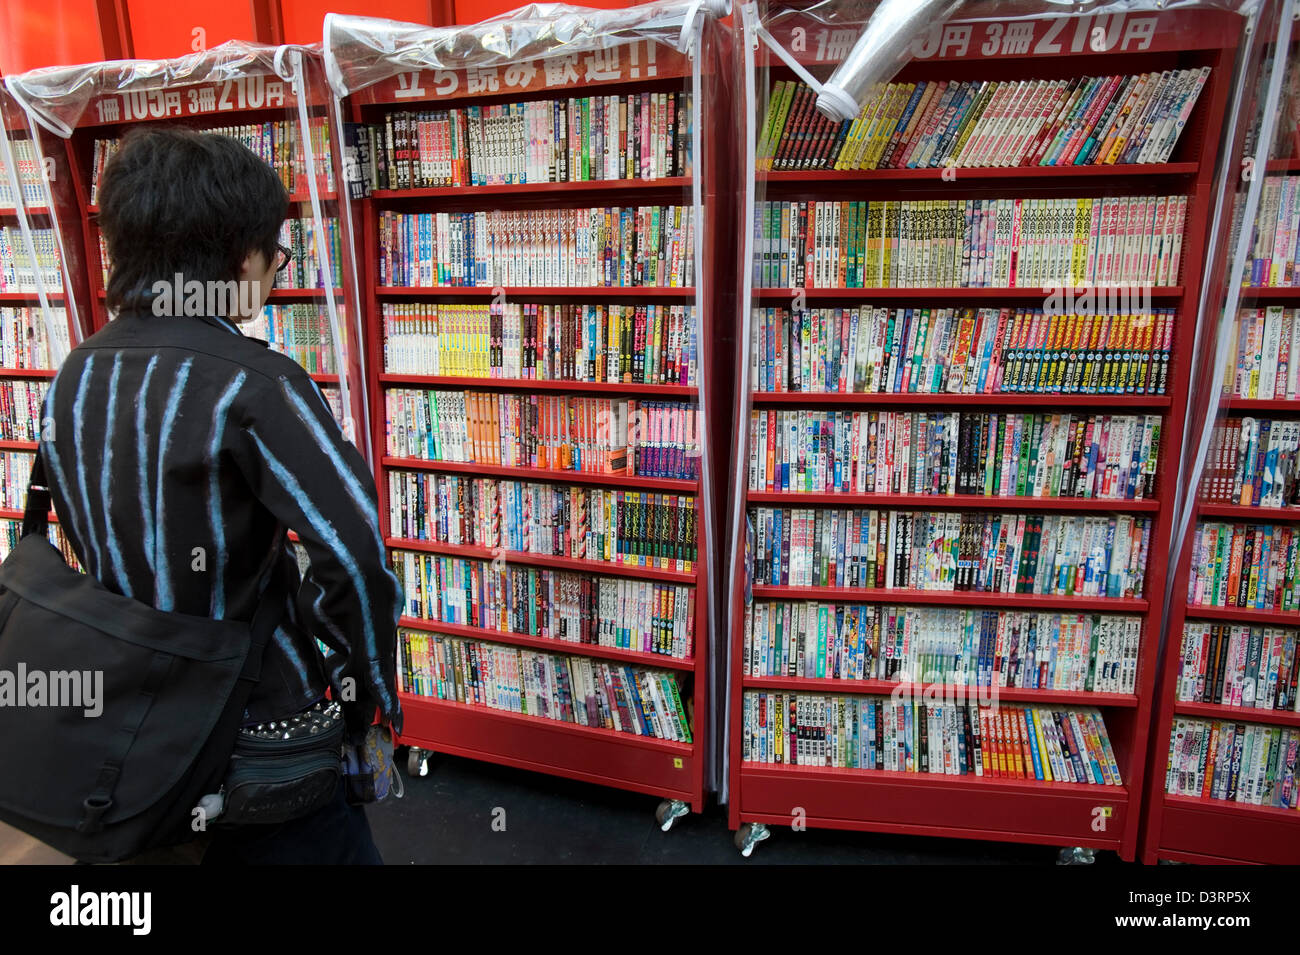 A patron browses a wide selection of used, discounted fiction and anime books at a bookstore in Osaka, Japan. Stock Photo